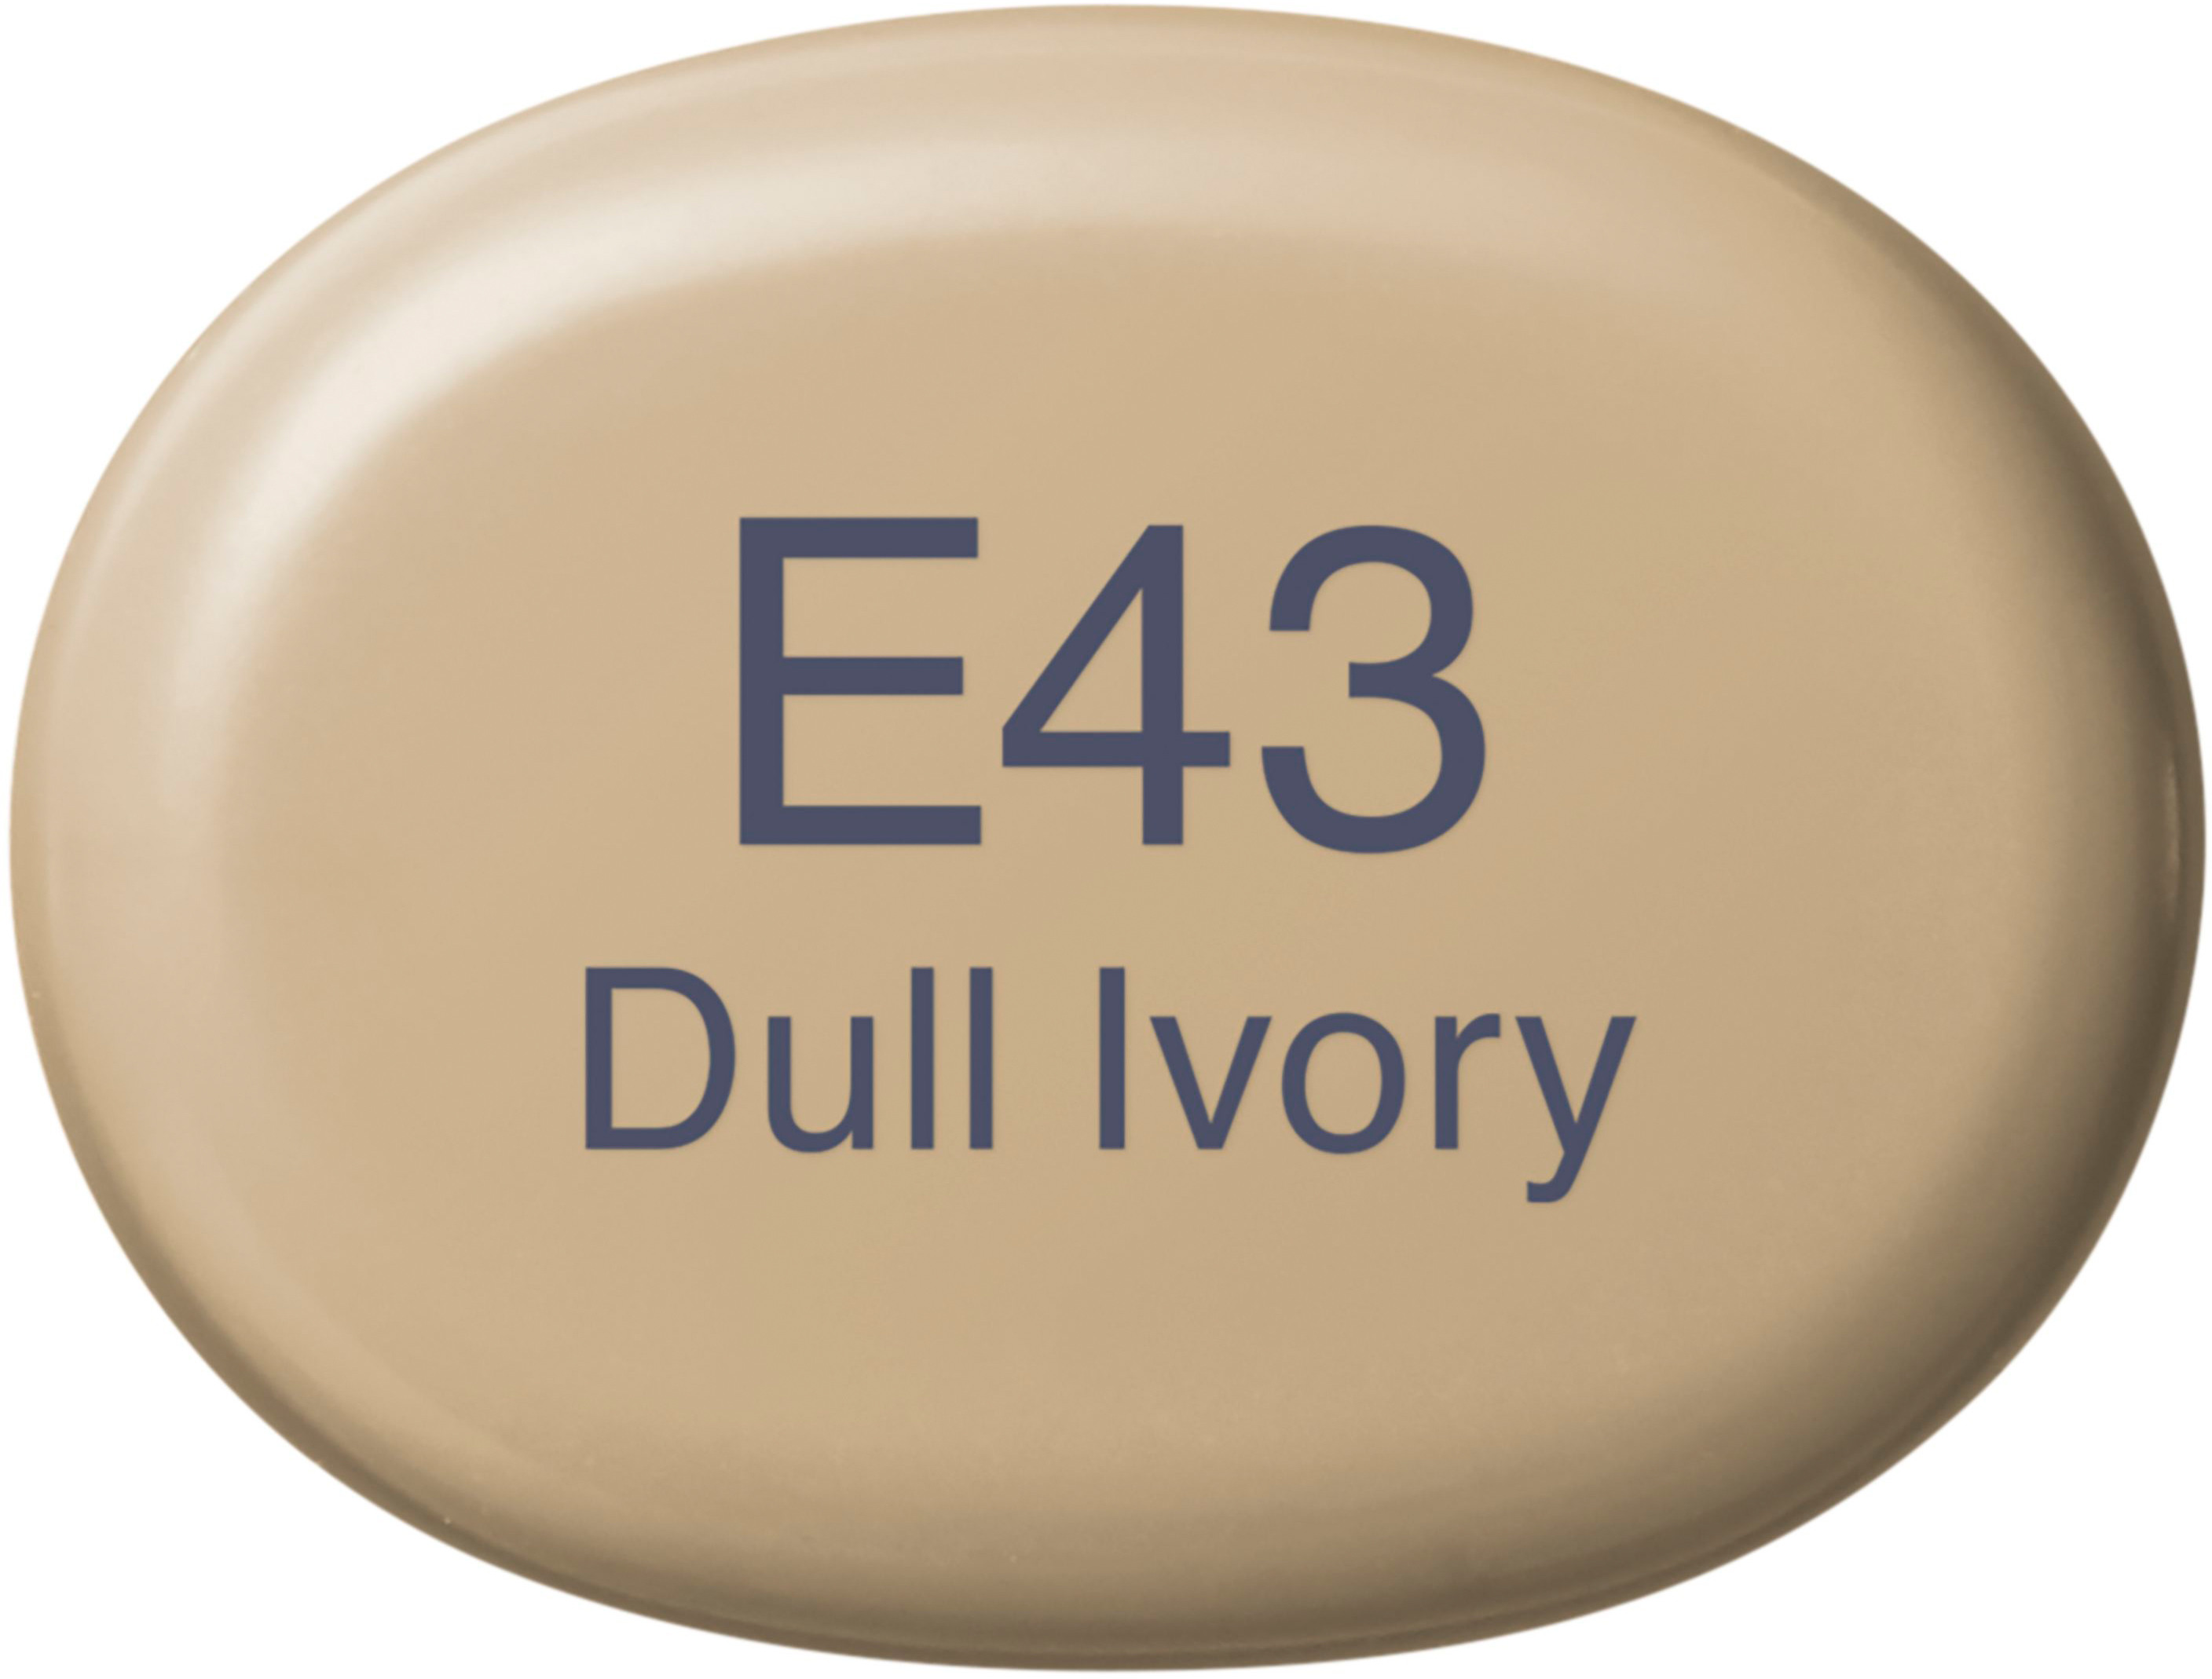 COPIC Marker Sketch 21075235 E43 - Dull Ivory